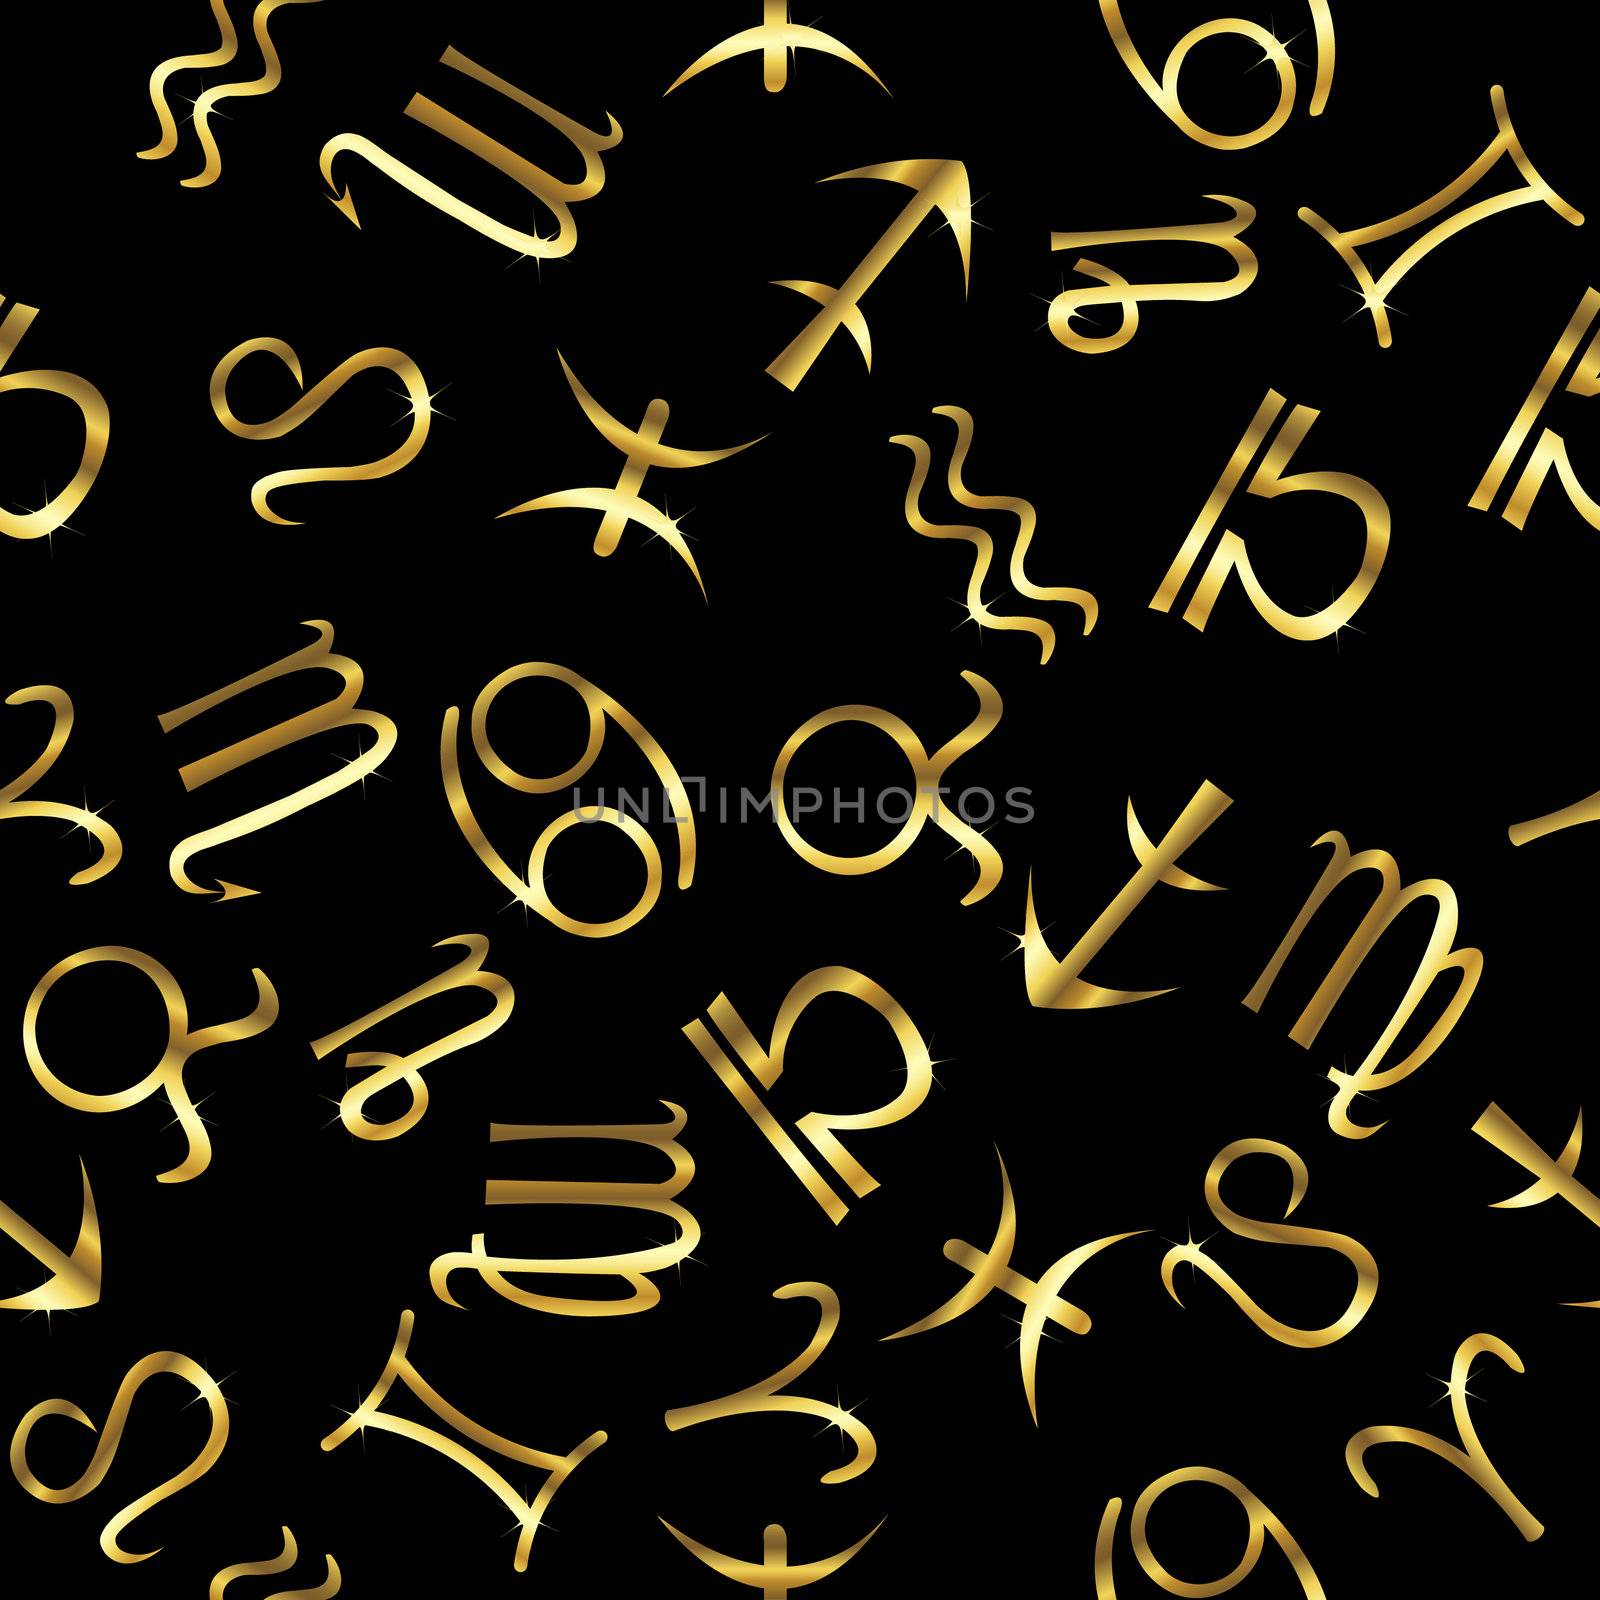 Golden zodiacal signs over black background by hibrida13